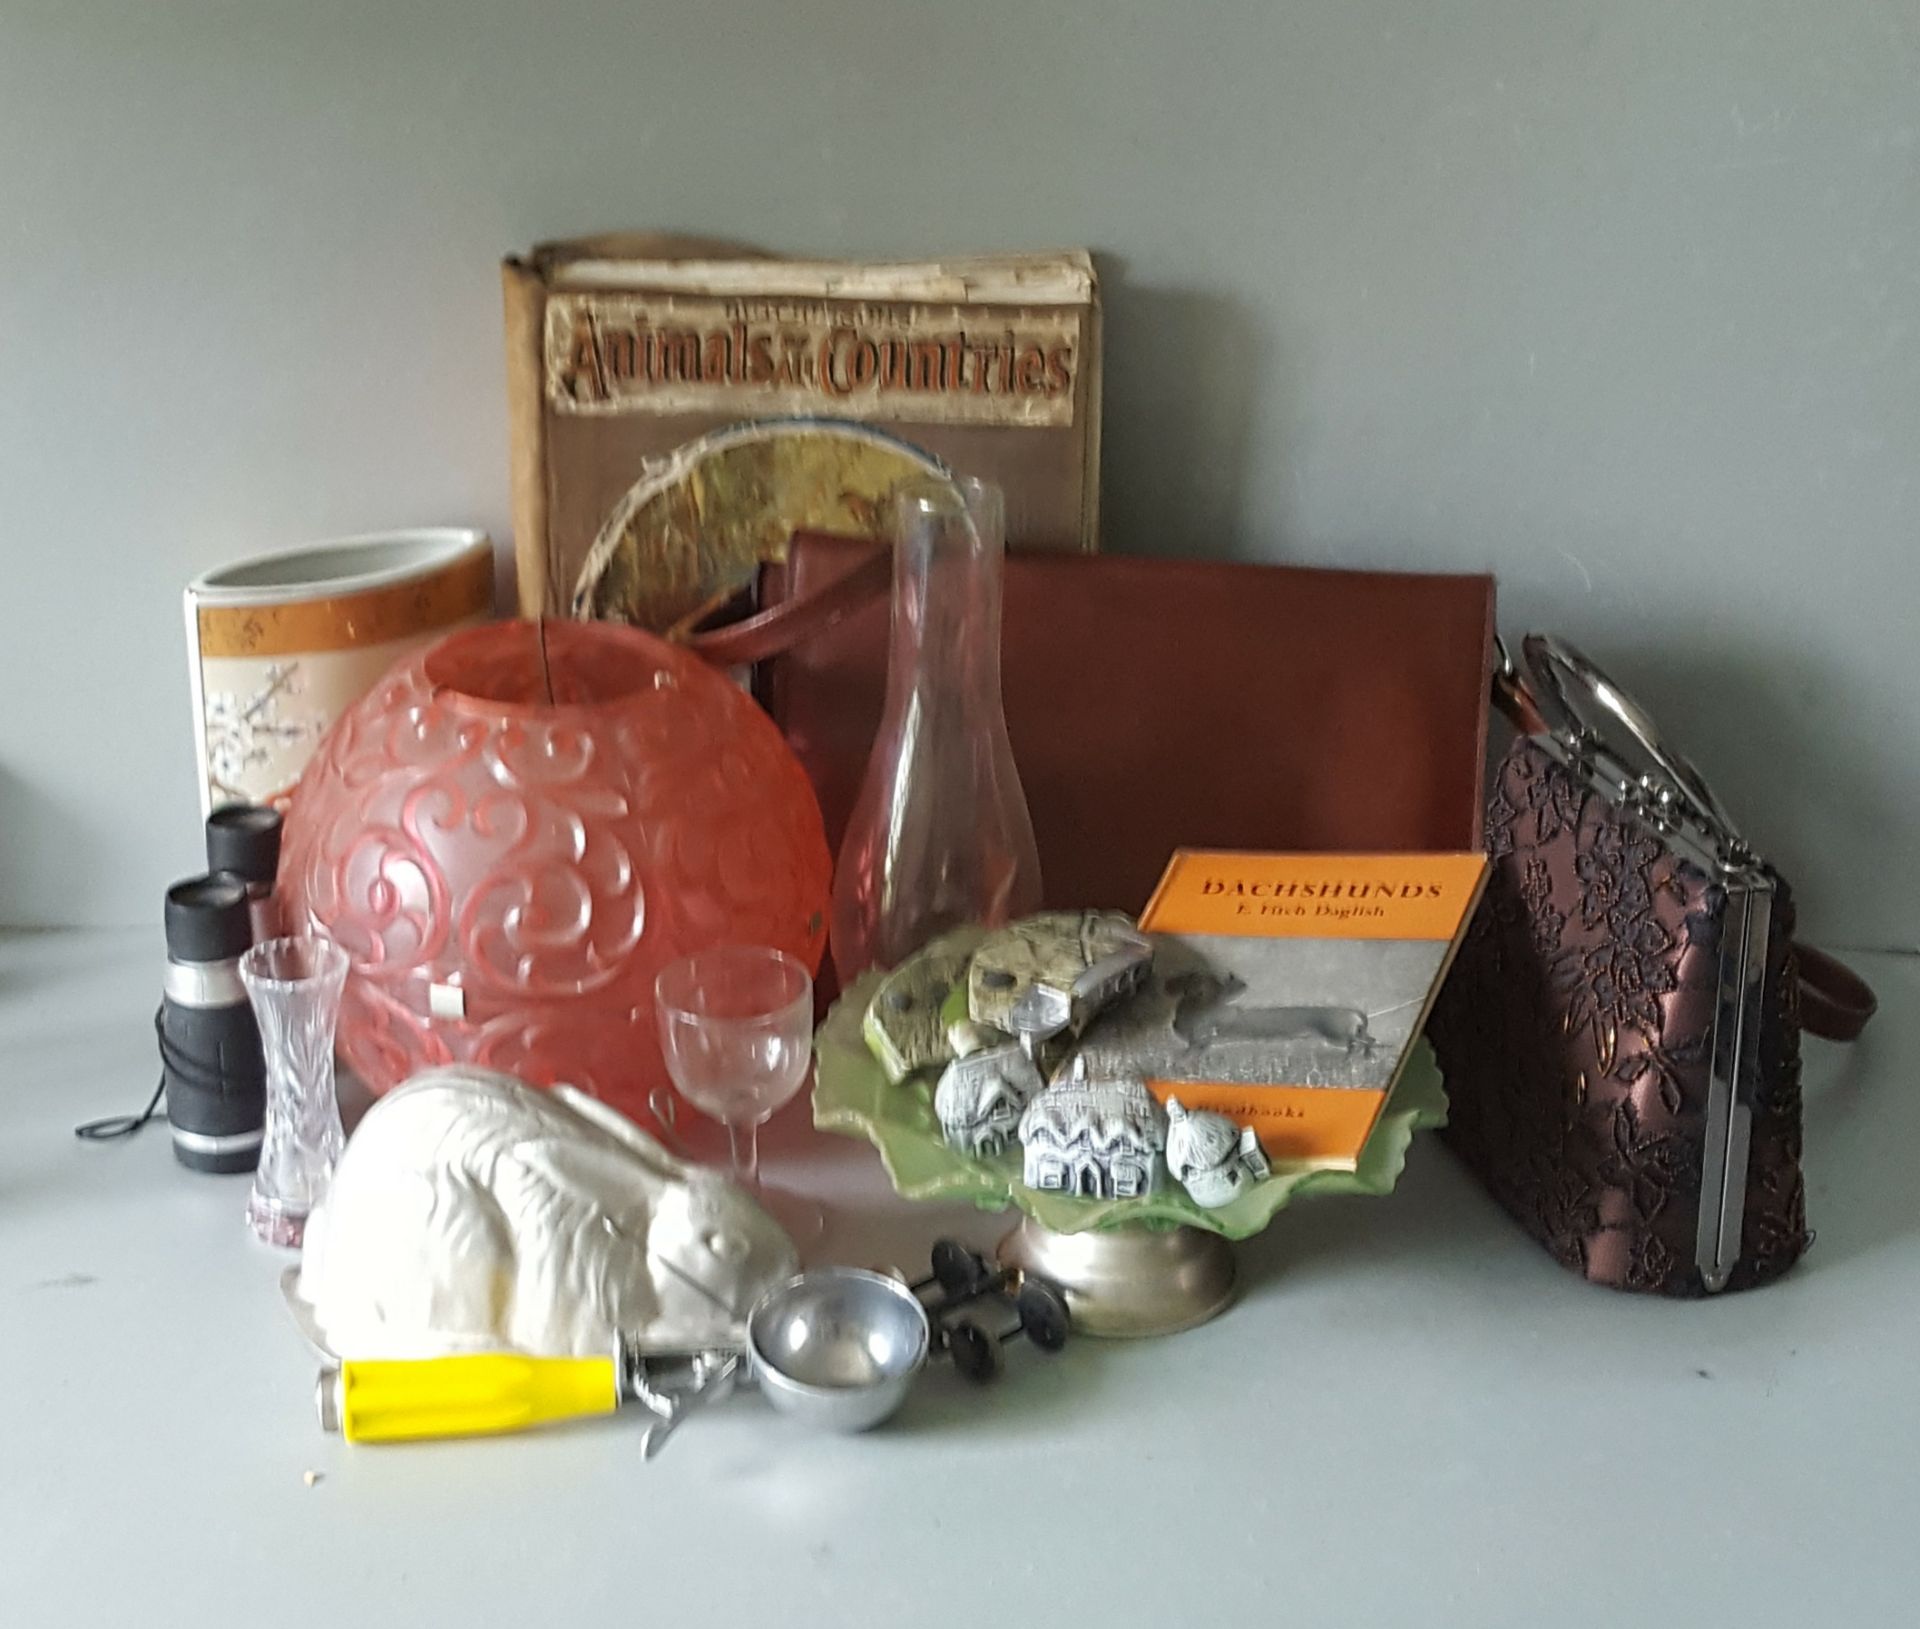 Vintage Retro Parcel Items Includes Lighting Jelly Mould Cake Stand Bags Books Etc. NO RESERVE